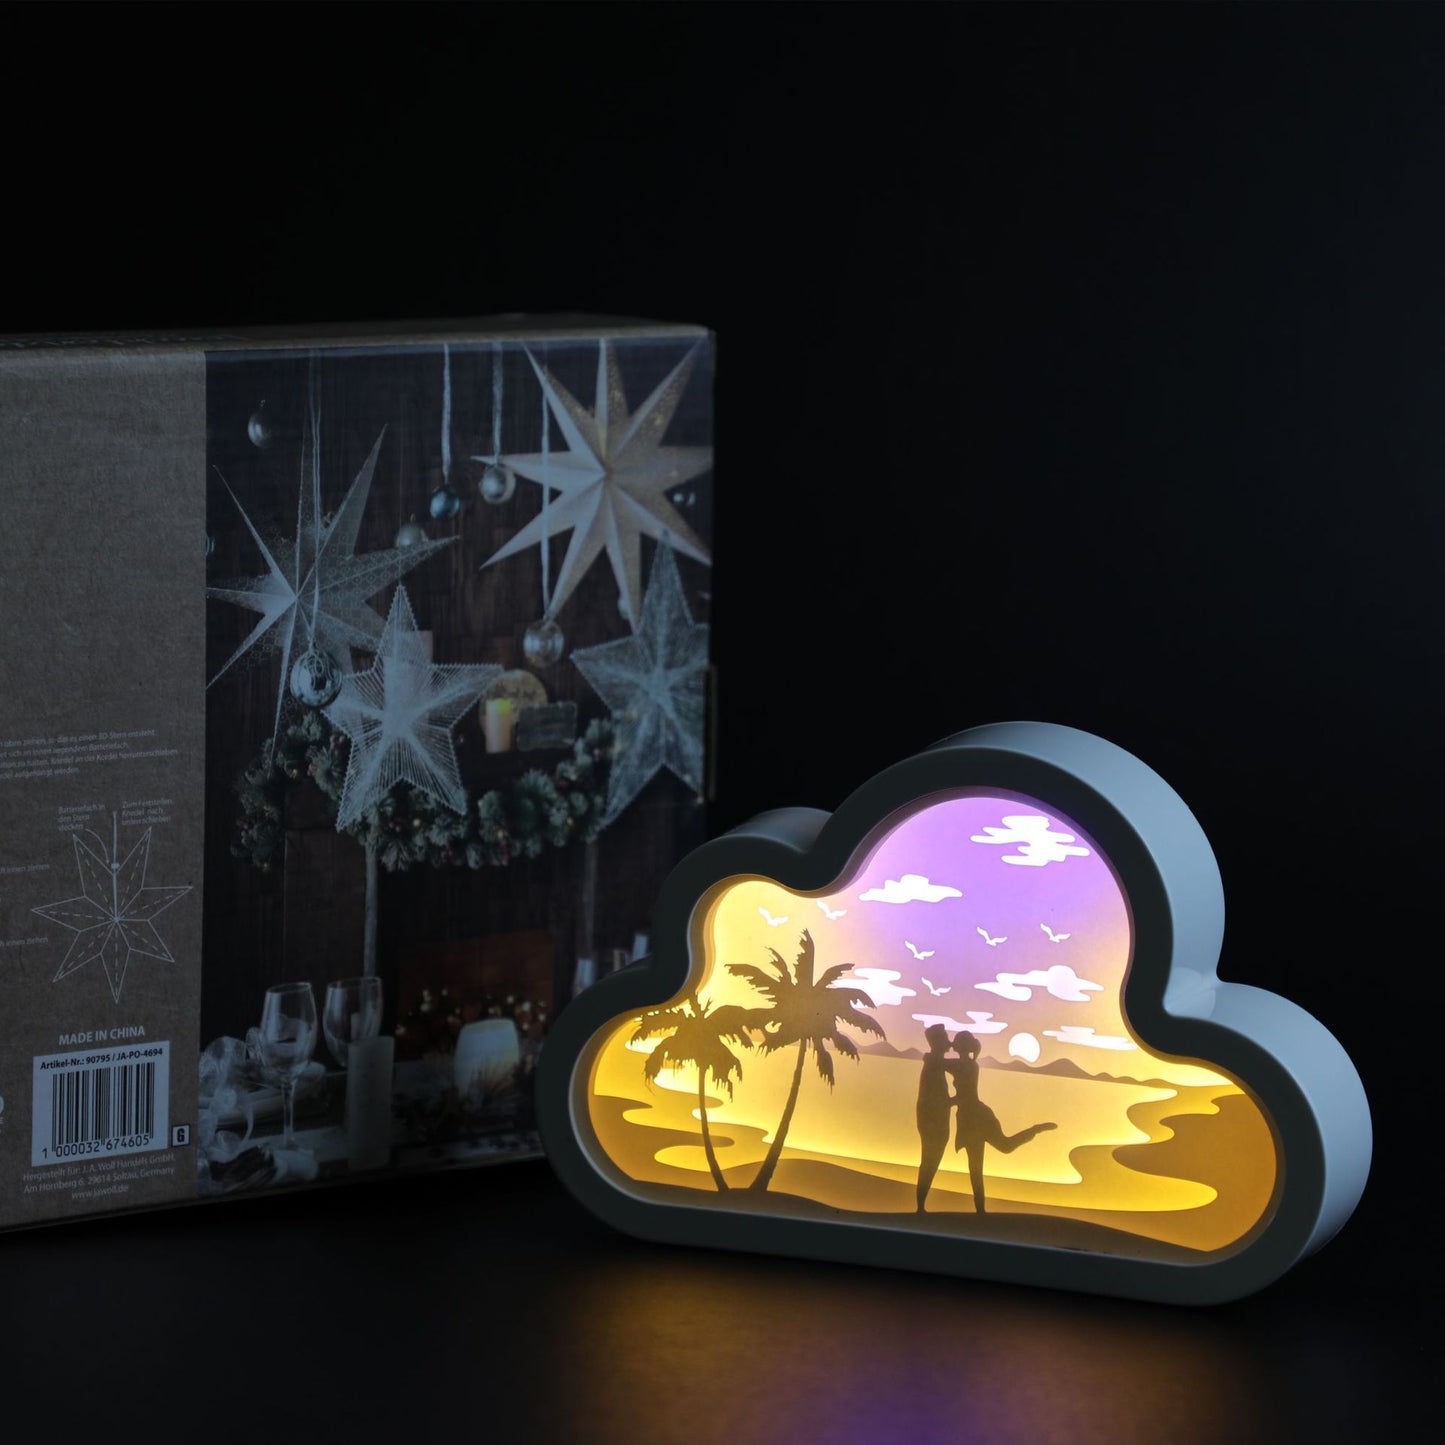 INSNIC Creative Gift 3D Cloud Shape Paper Carving Lamp